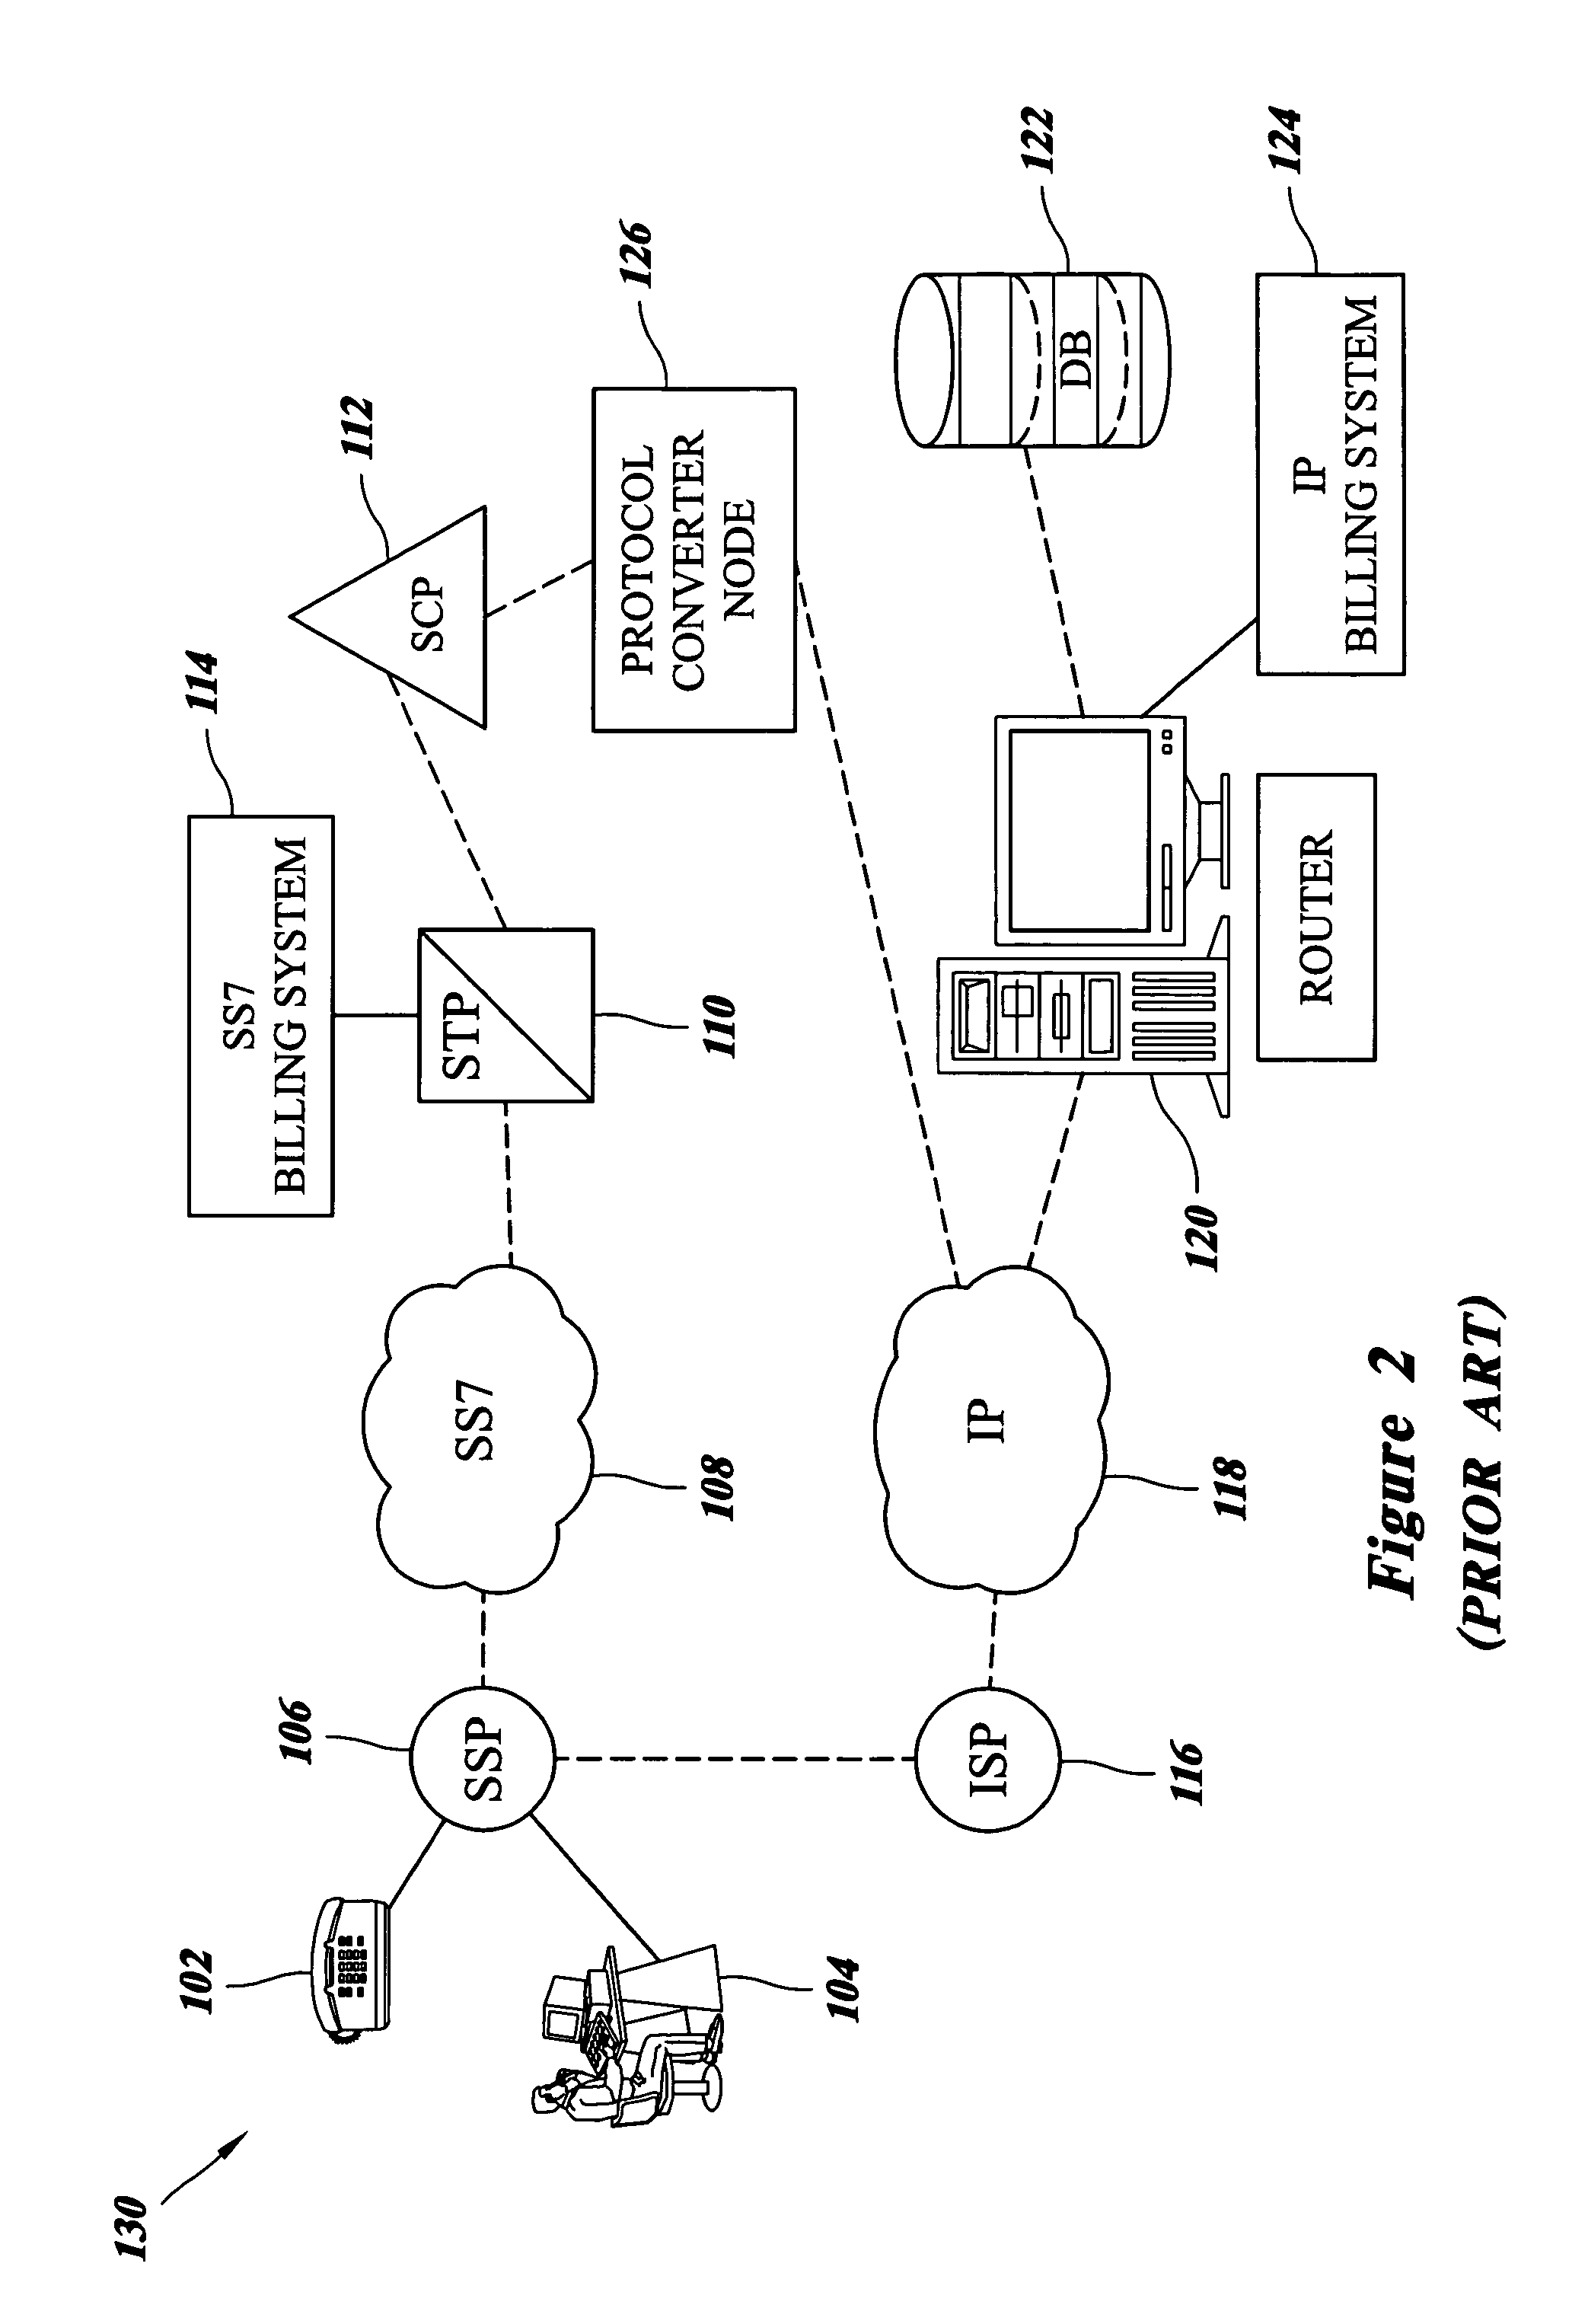 Methods and systems for providing message translation, accounting and routing service in a multi-protocol communications network environment